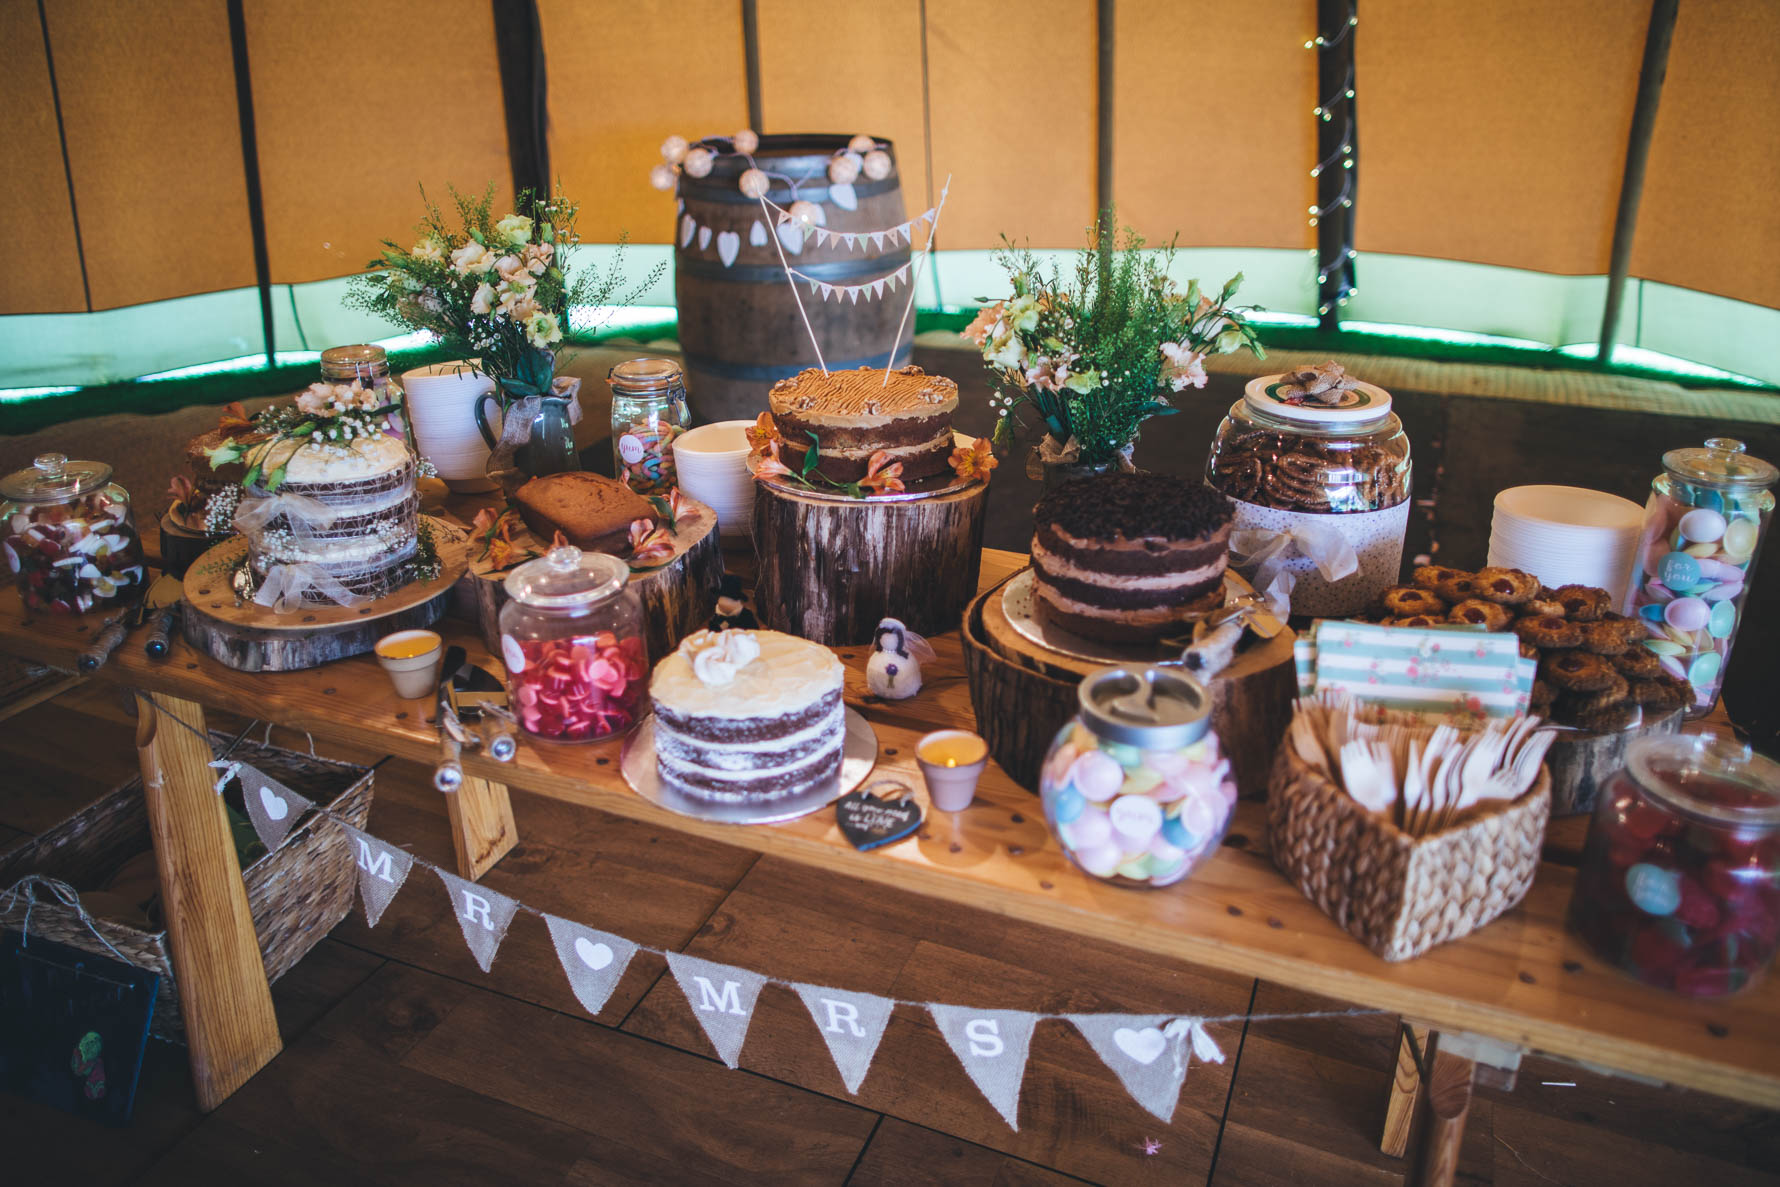 Table inside a tipi filled with cakes and sweets for a wedding reception